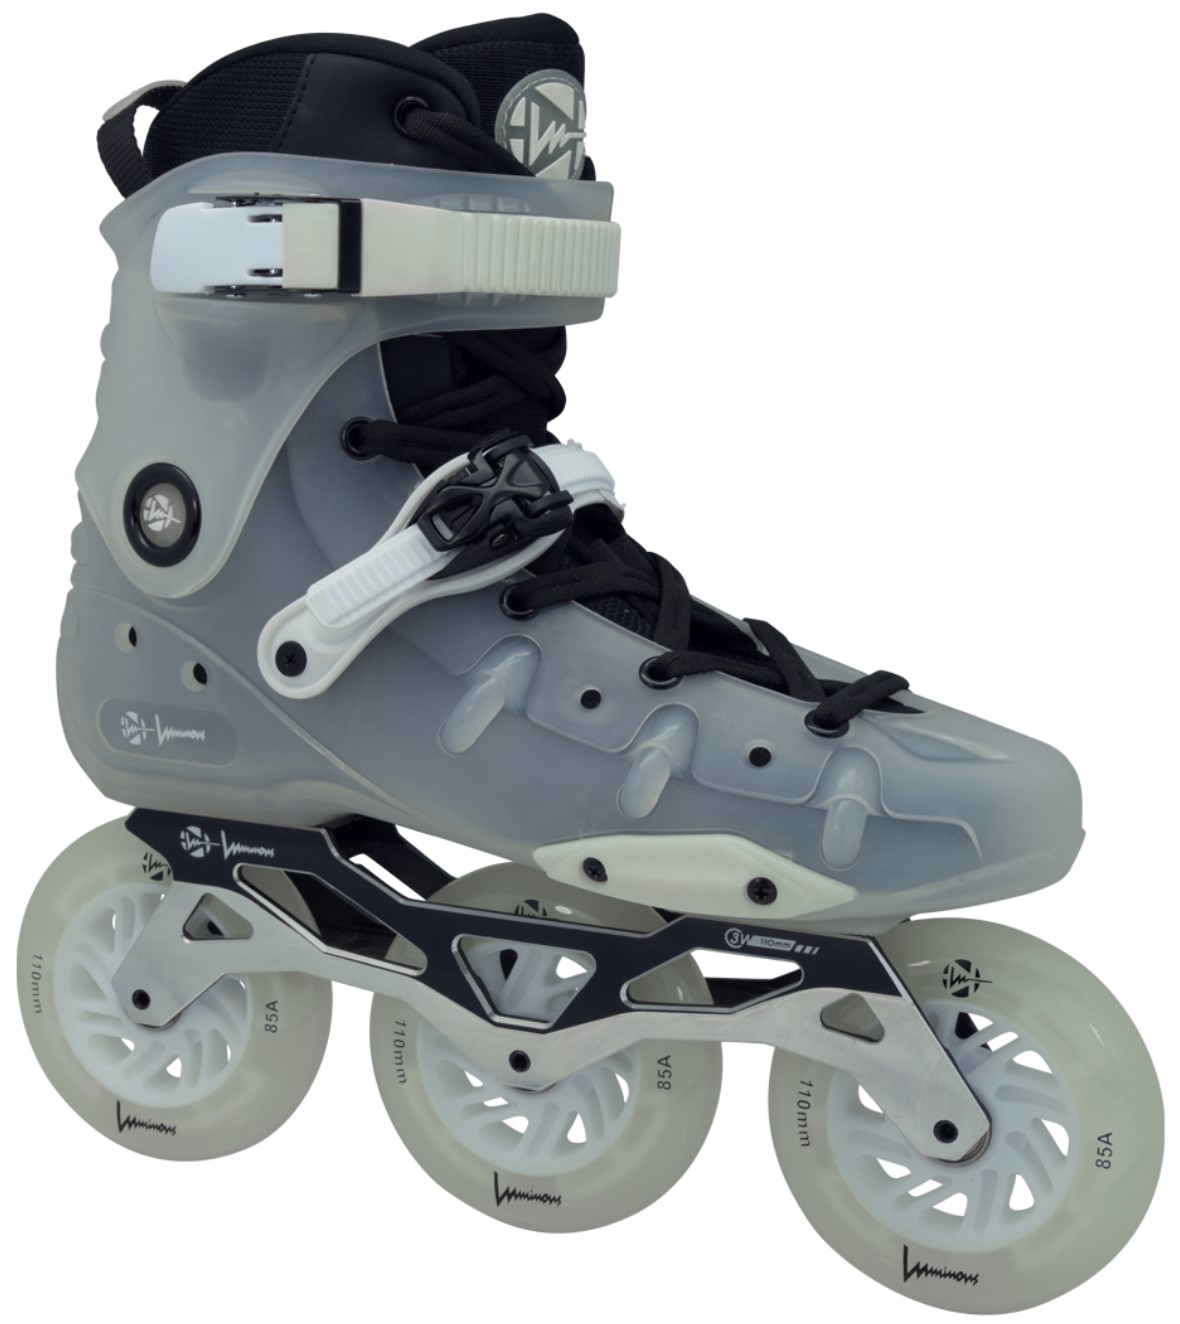 Luminous Ray 110 Clear inline skate with 3 Luminous wheels of 110 mm and glowing parts on the inline skate